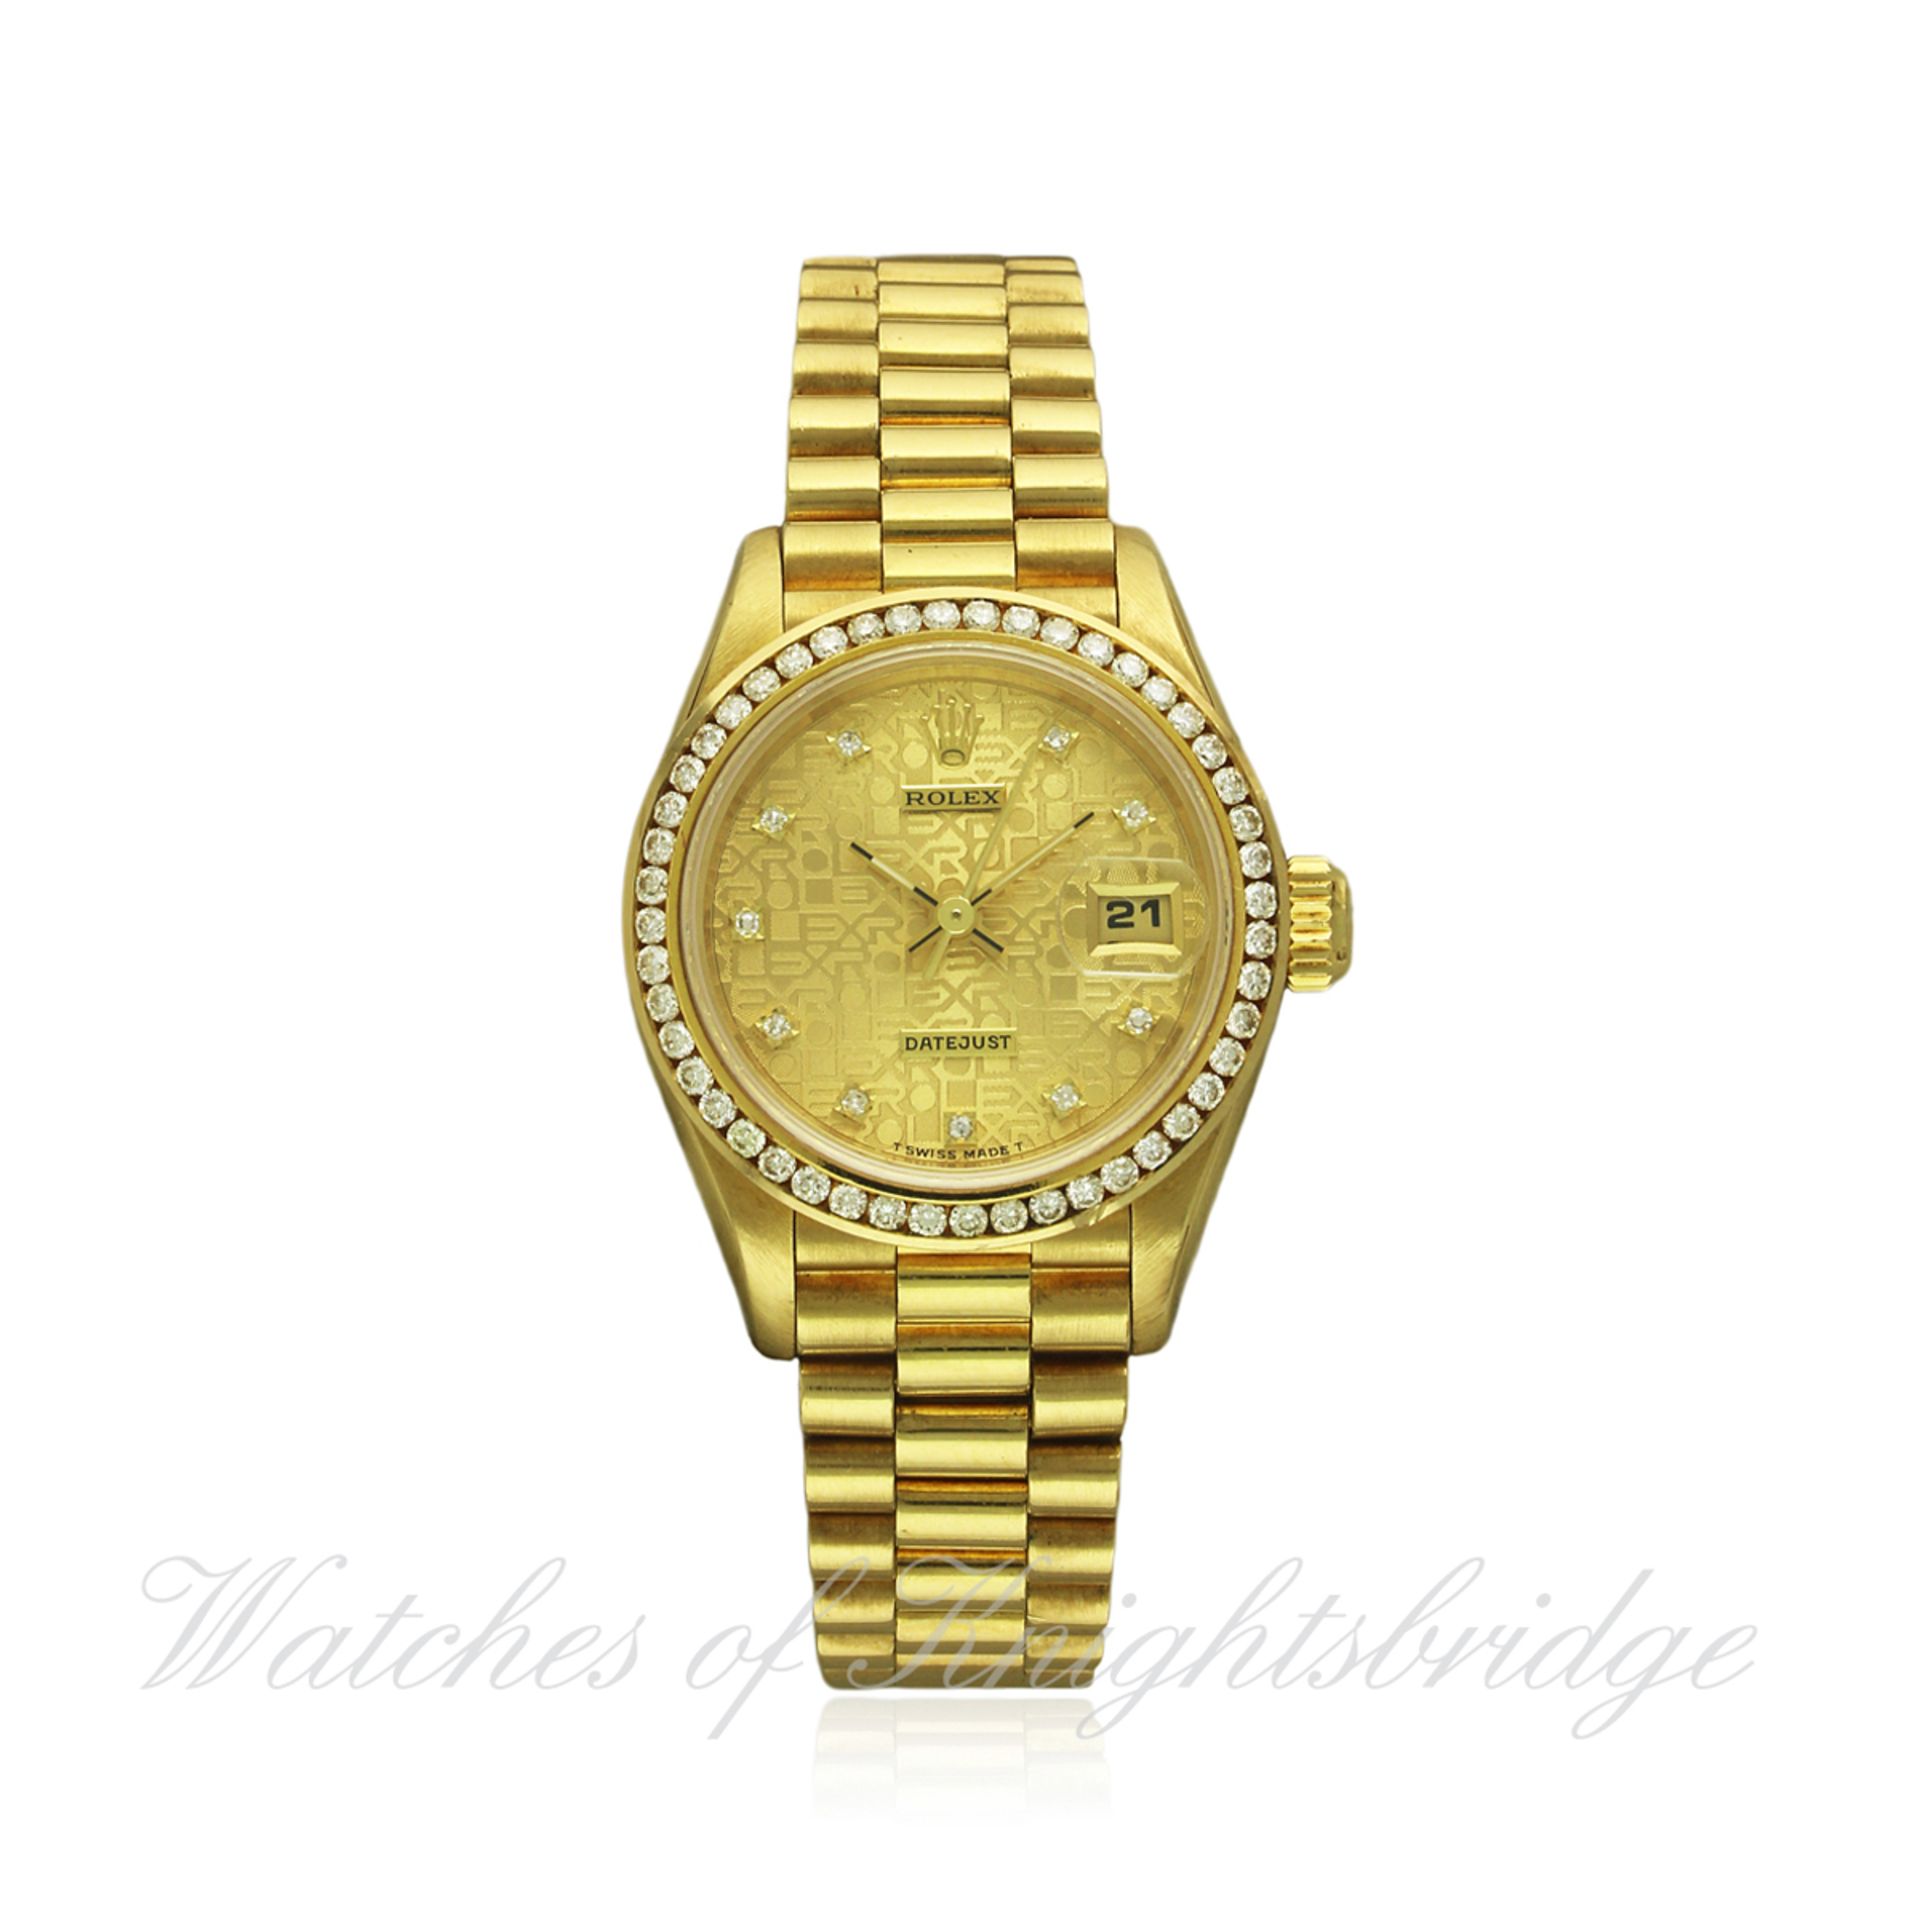 A FINE LADIES 18K SOLID GOLD ROLEX OYSTER PERPETUAL DATEJUST BRACELET WATCH CIRCA 1986, REF. 69178